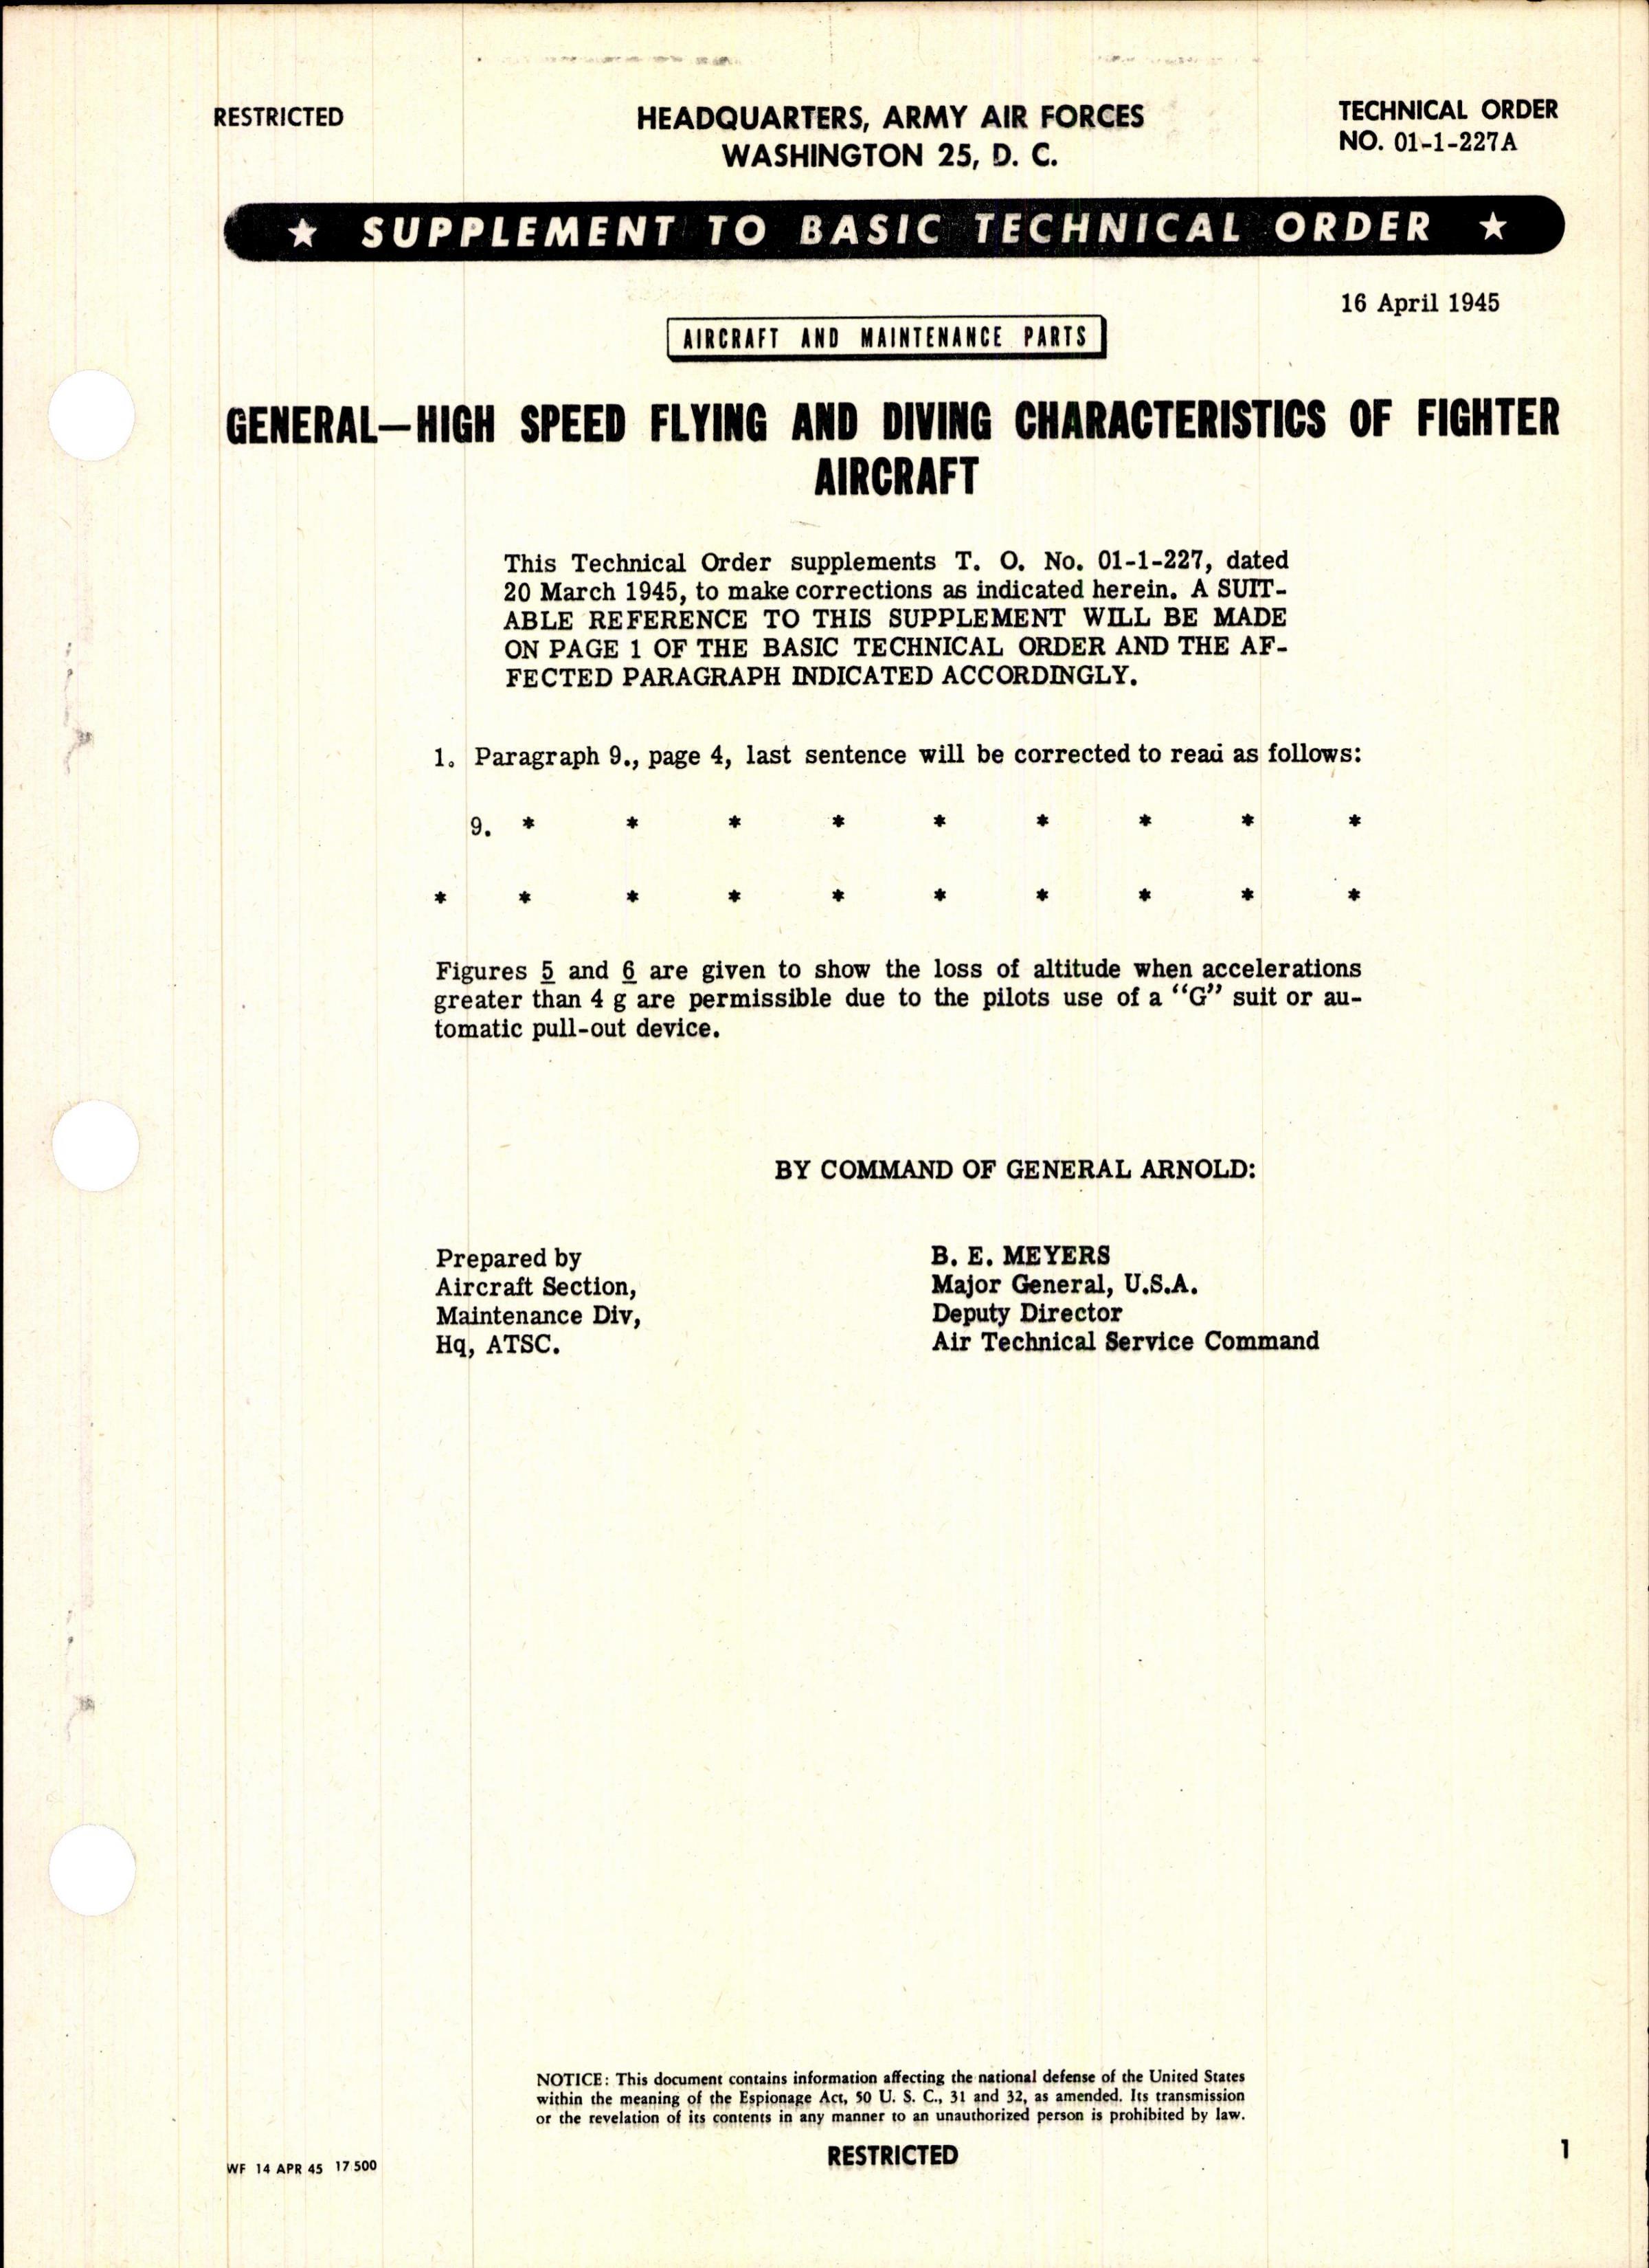 Sample page 1 from AirCorps Library document: High Speed Flying and Diving Characteristics of Fighter Aircraft